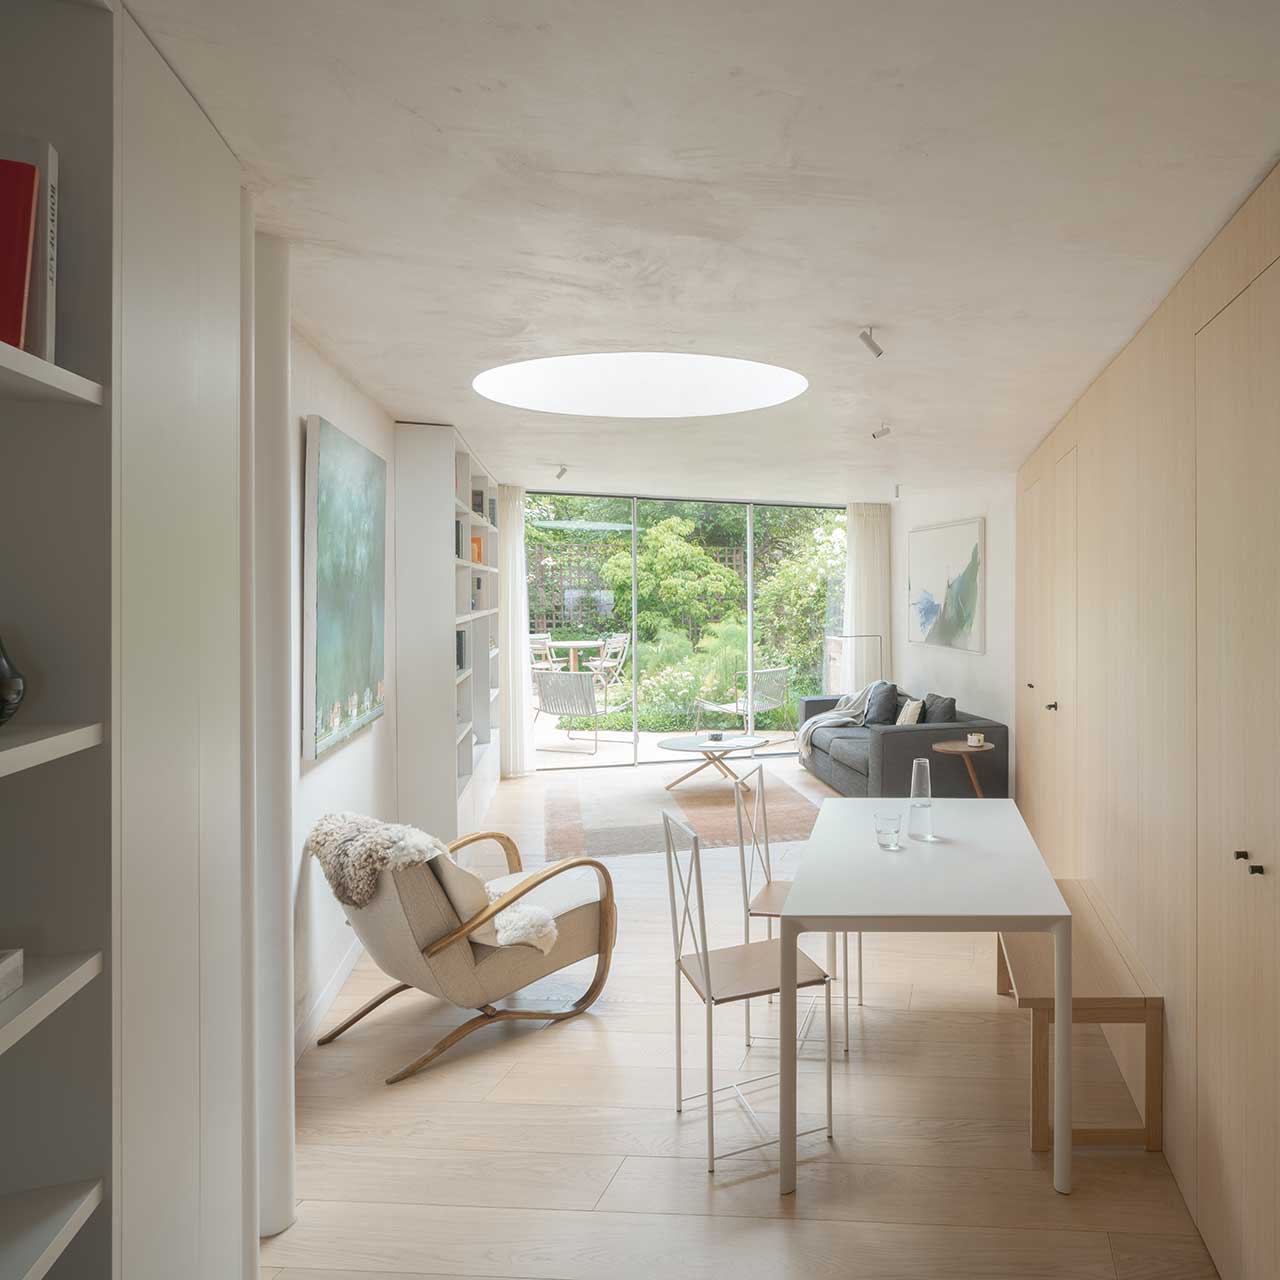 Traditional London Townhouse Becomes Modern Home for a Cellist